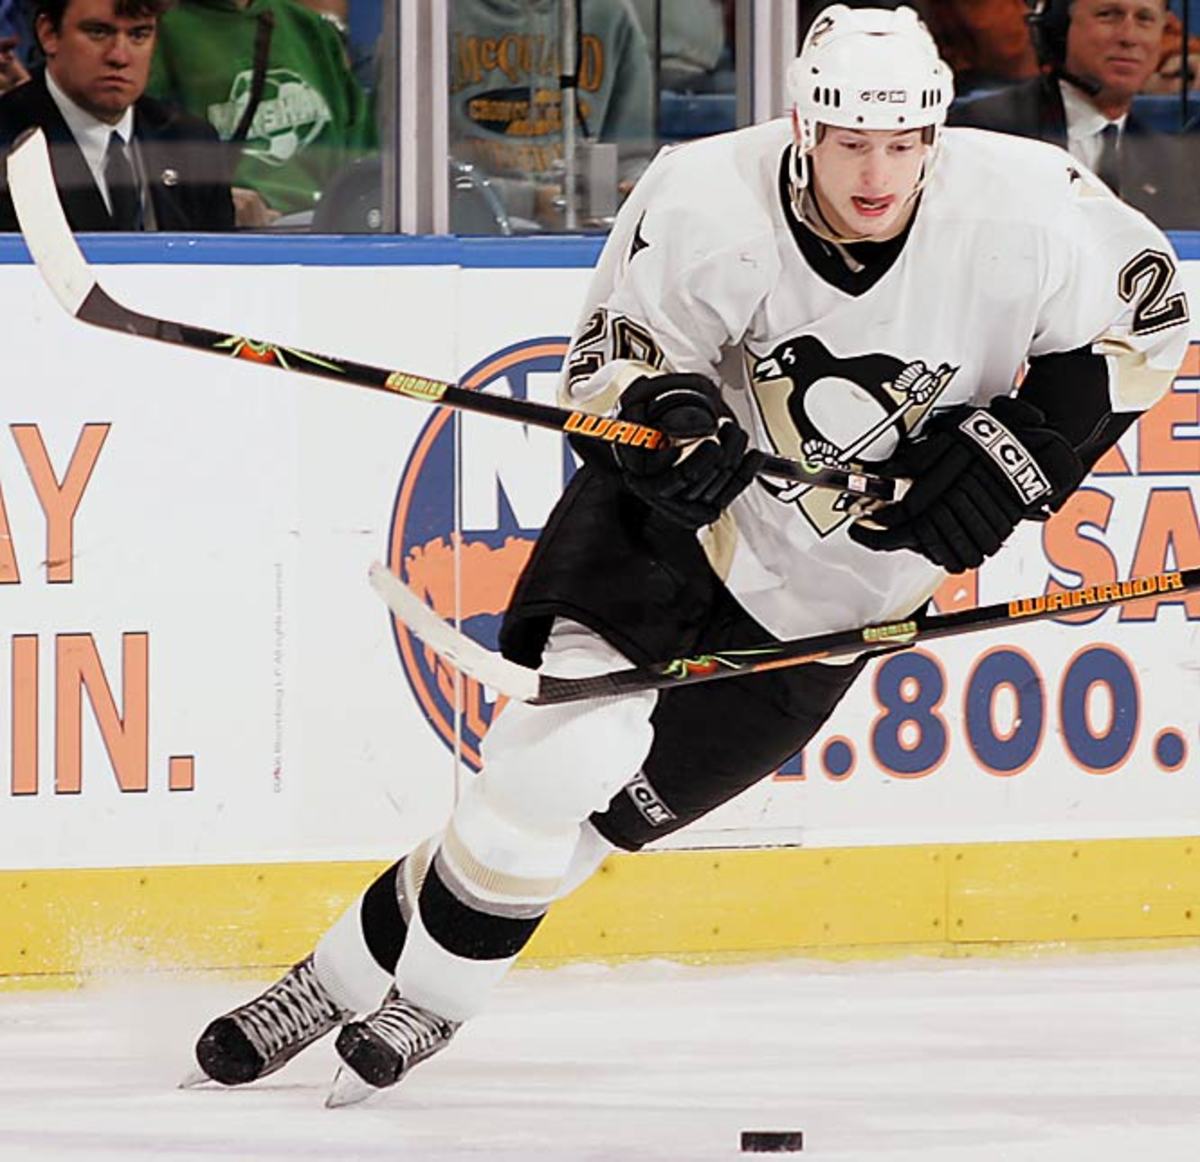 Penguins: Colby Armstrong